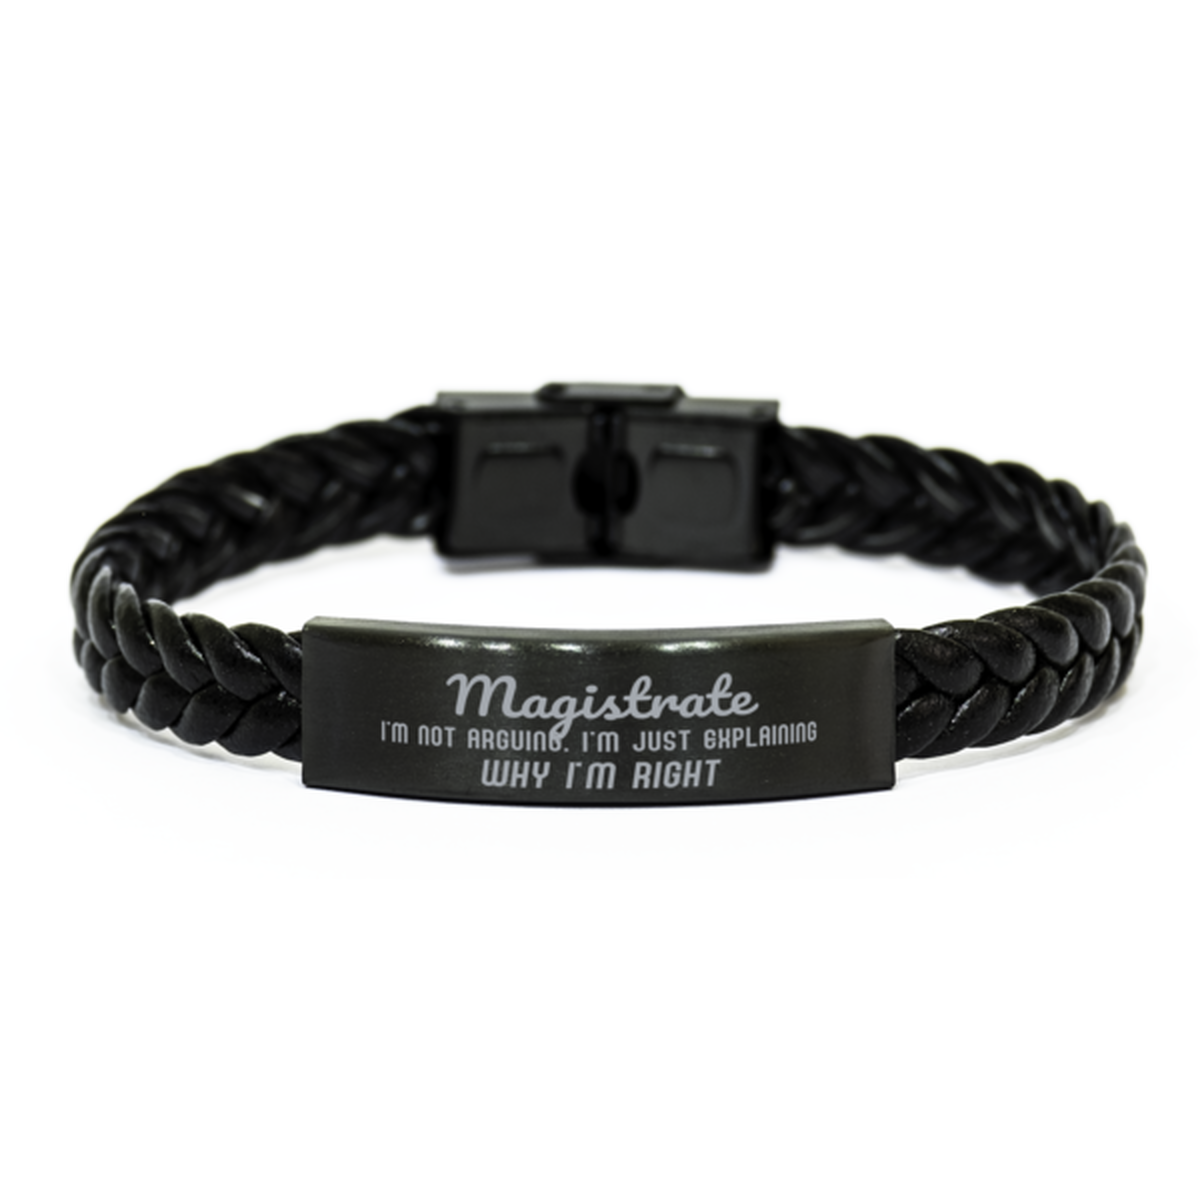 Magistrate I'm not Arguing. I'm Just Explaining Why I'm RIGHT Braided Leather Bracelet, Graduation Birthday Christmas Magistrate Gifts For Magistrate Funny Saying Quote Present for Men Women Coworker